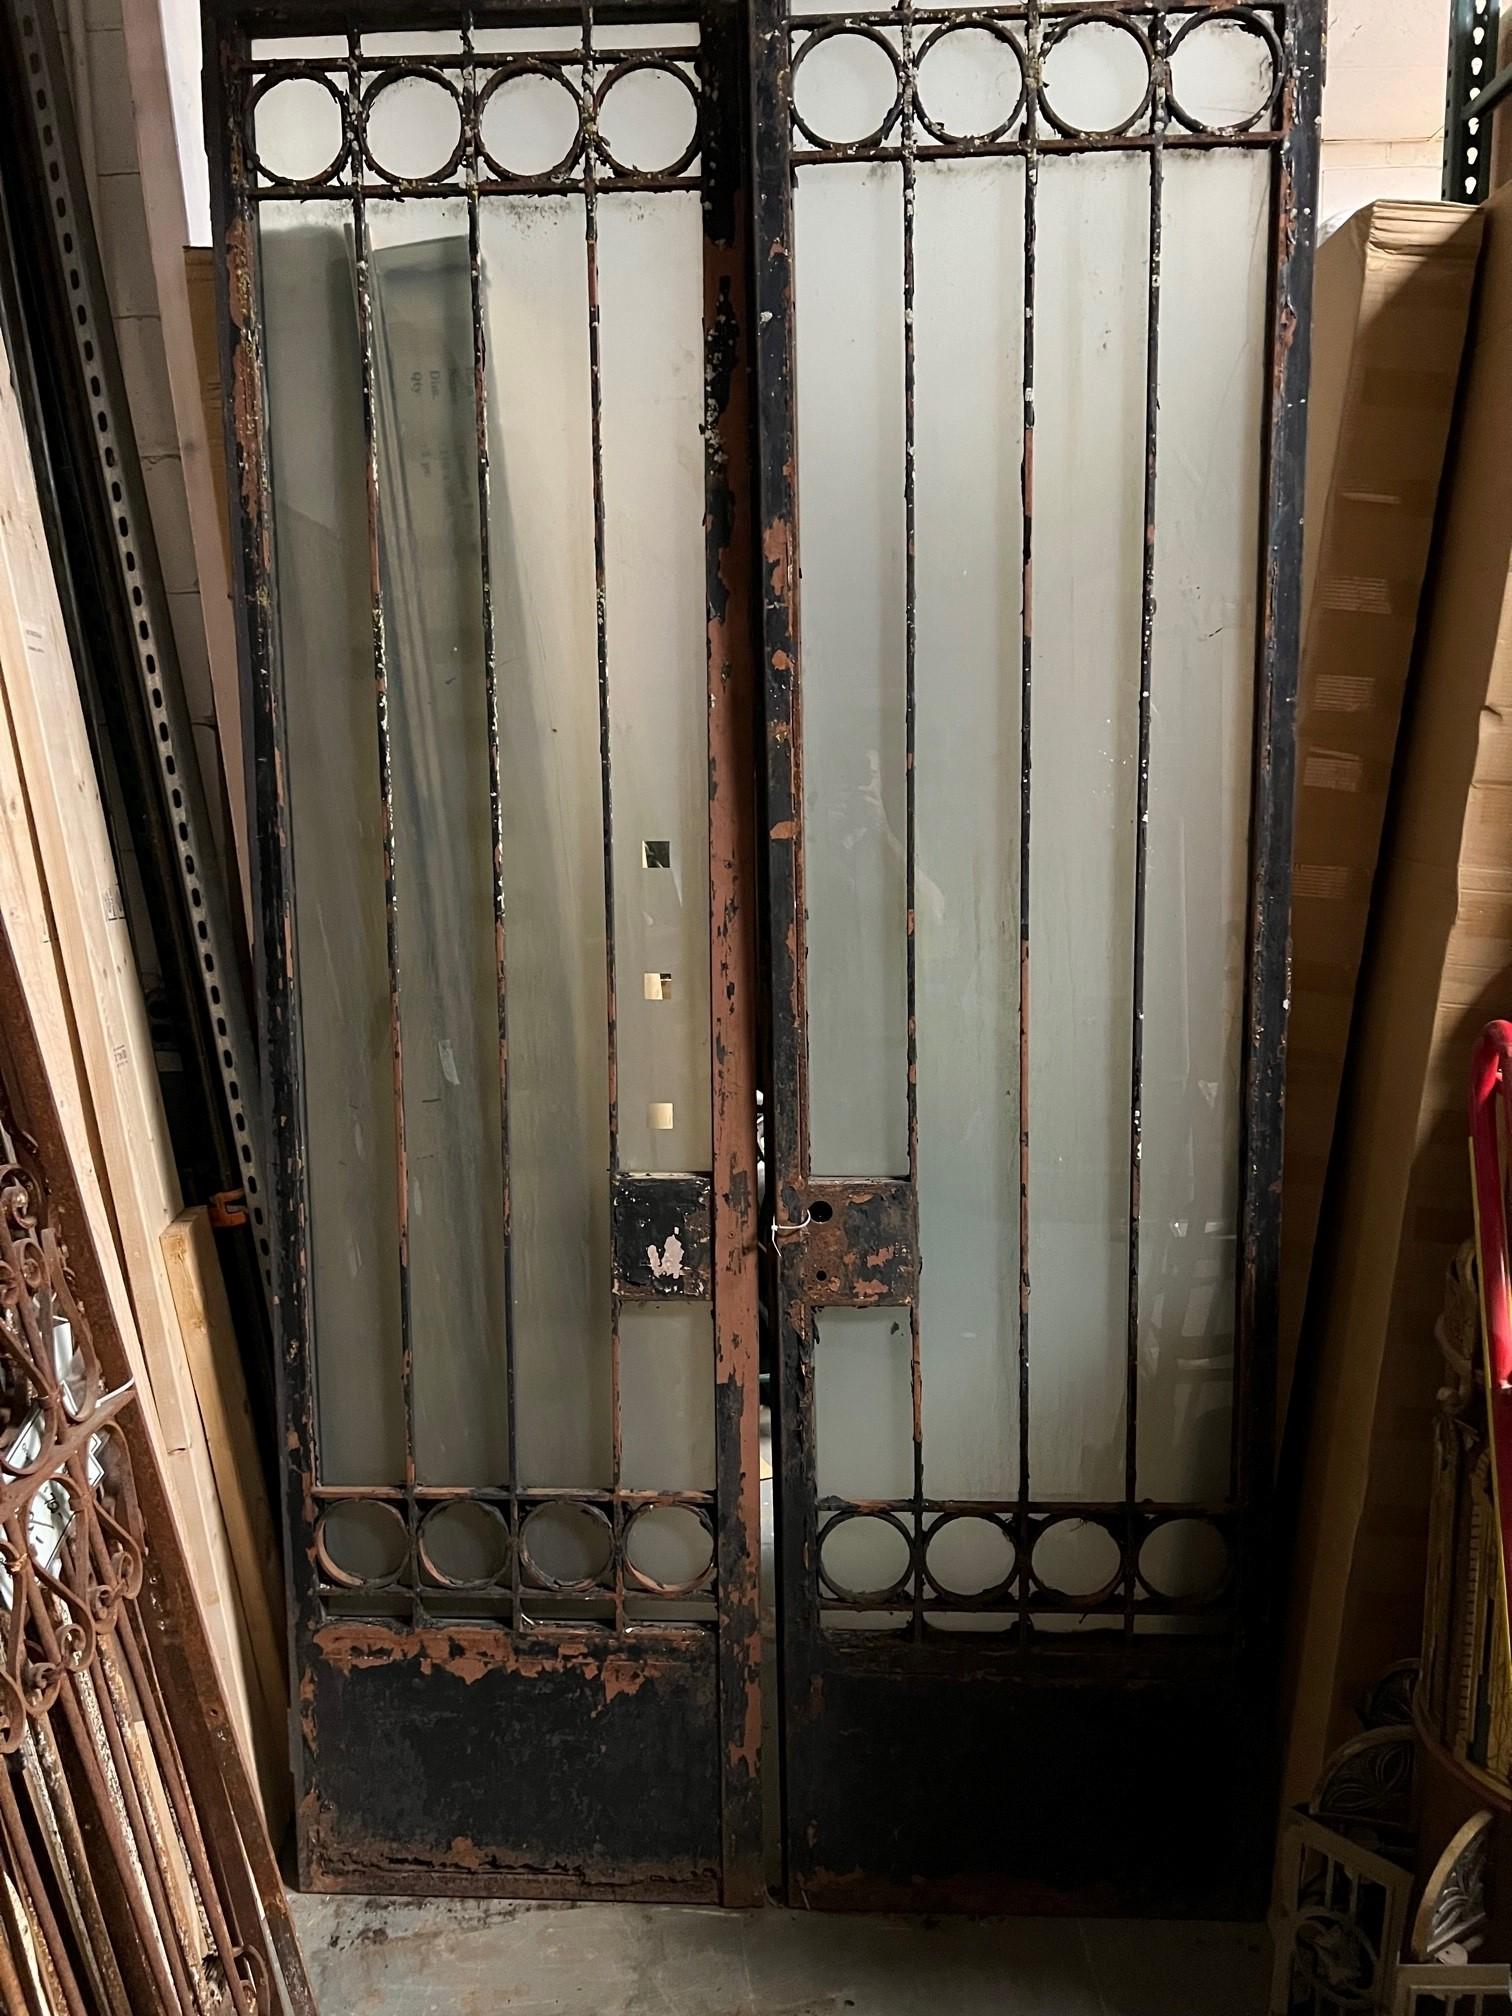 A great pair of tall iron doors with frosted glass panels, very heavy. The doors were salvaged from a building in NYC. They need to be cleaned, painted and the bottom of the doors needs to be repair from rust damage. Overall they are very sturdy